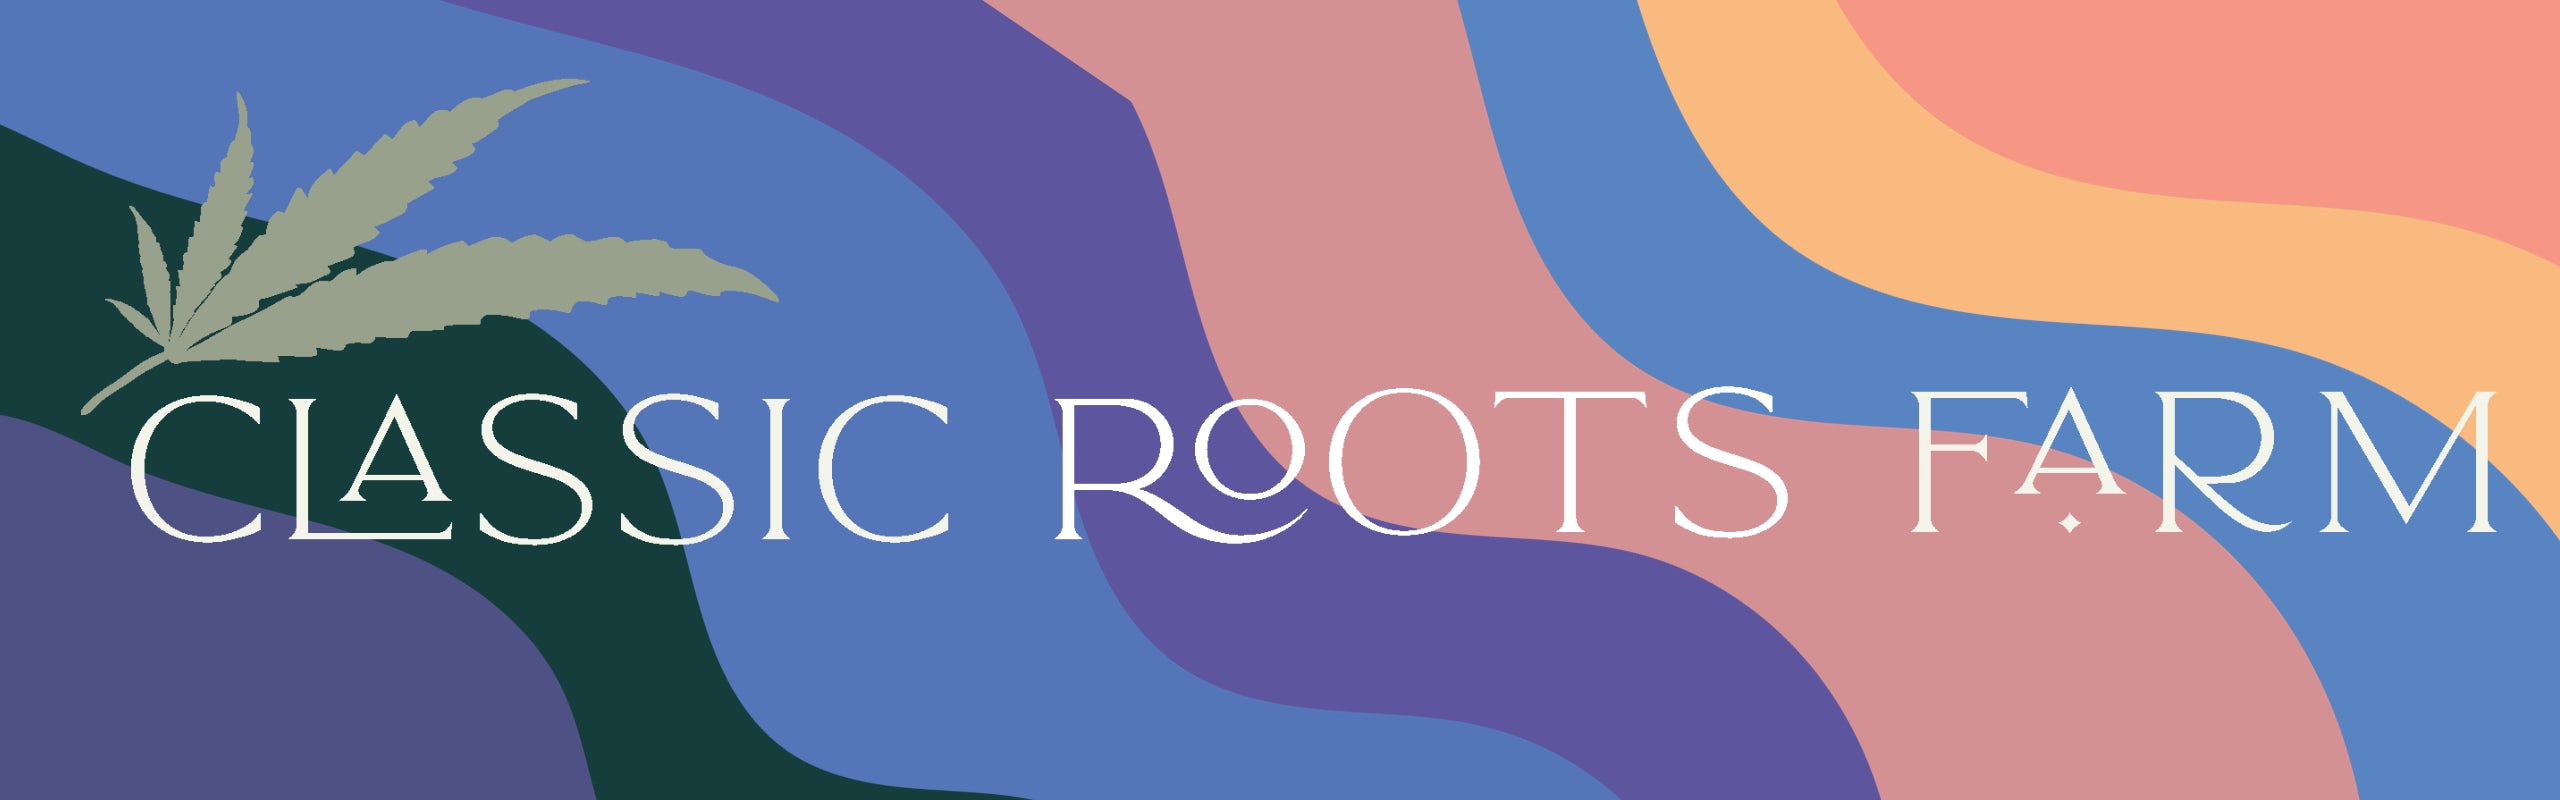 Classic Roots Farm banner